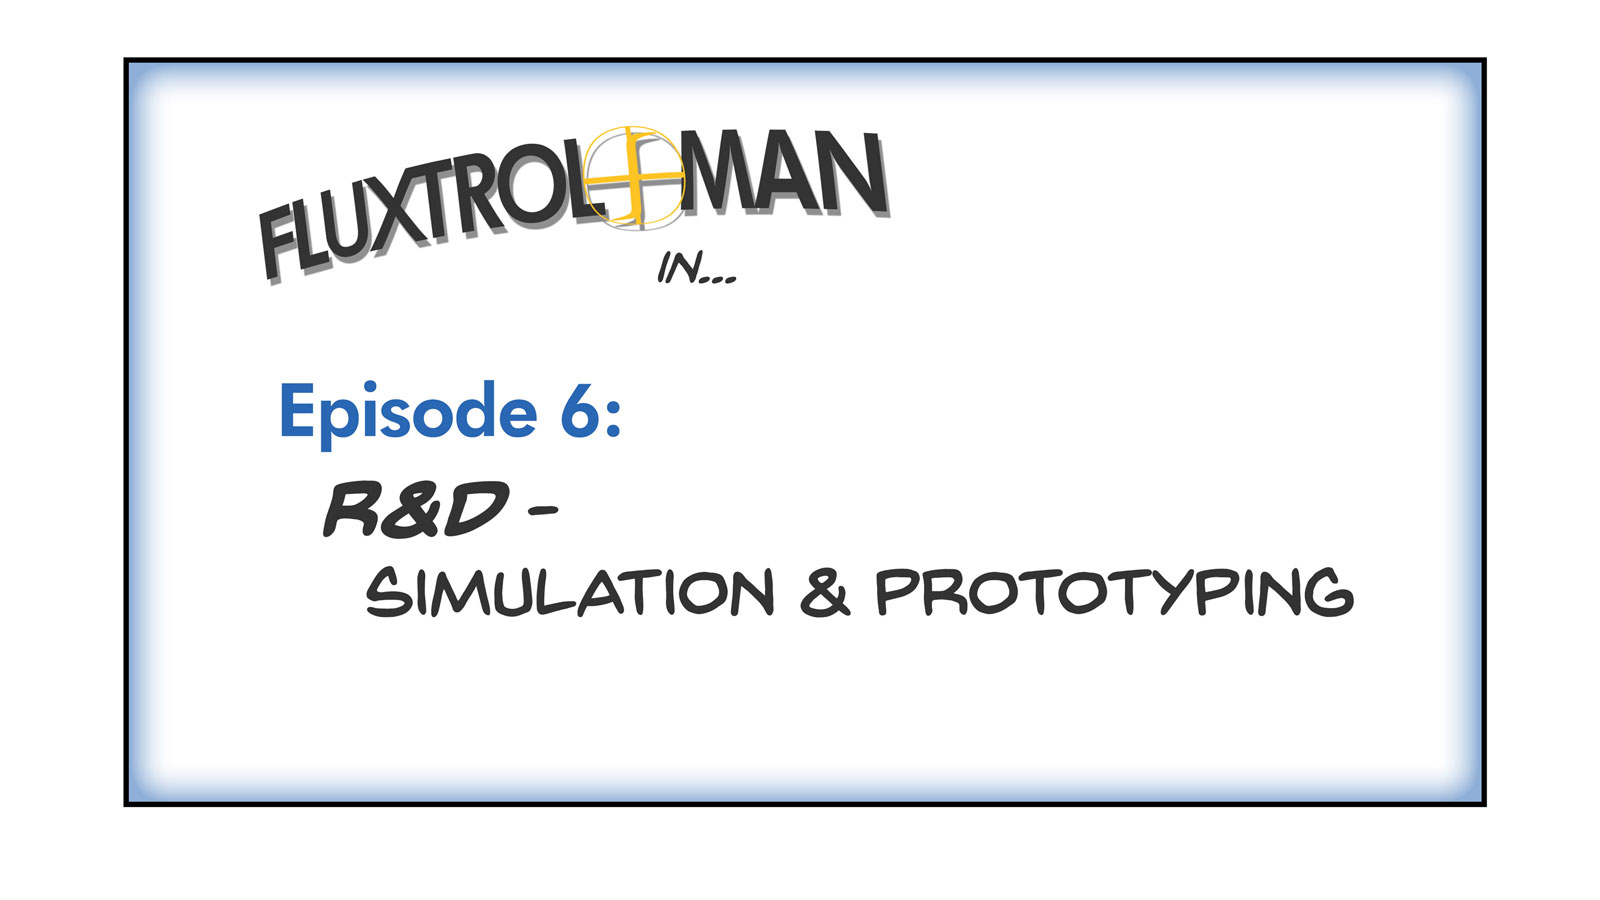 Adventures of Fluxtrol Man | S1E6 R&D - Simulation and Prototyping Slide 1